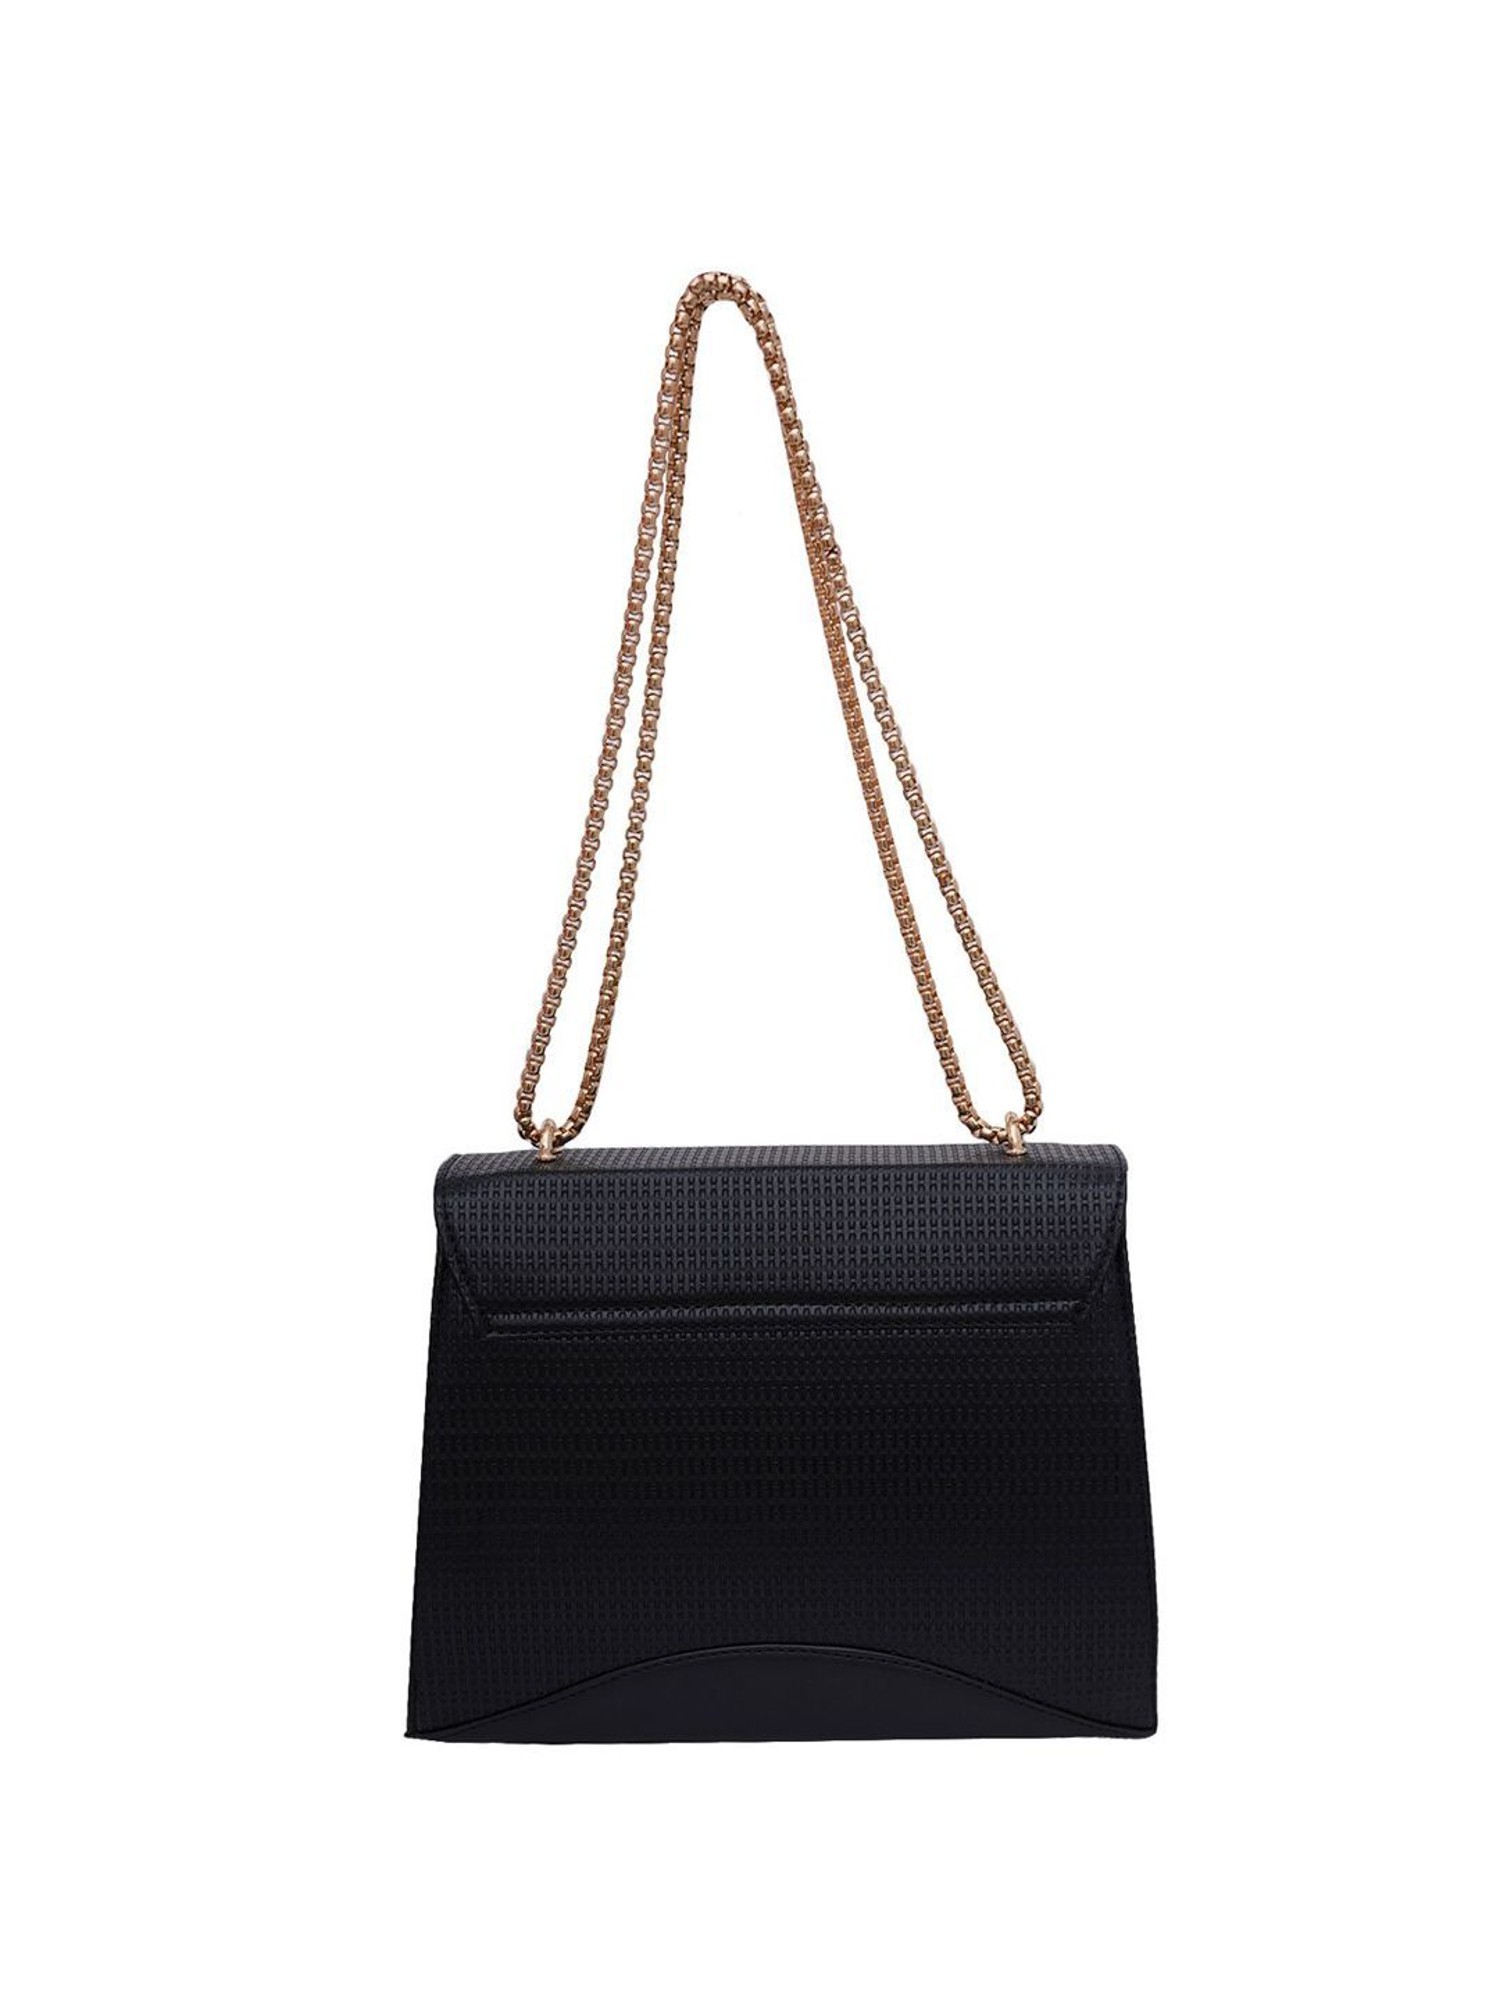 bags - Buy branded bags online, bags for Women at Limeroad. | page 2